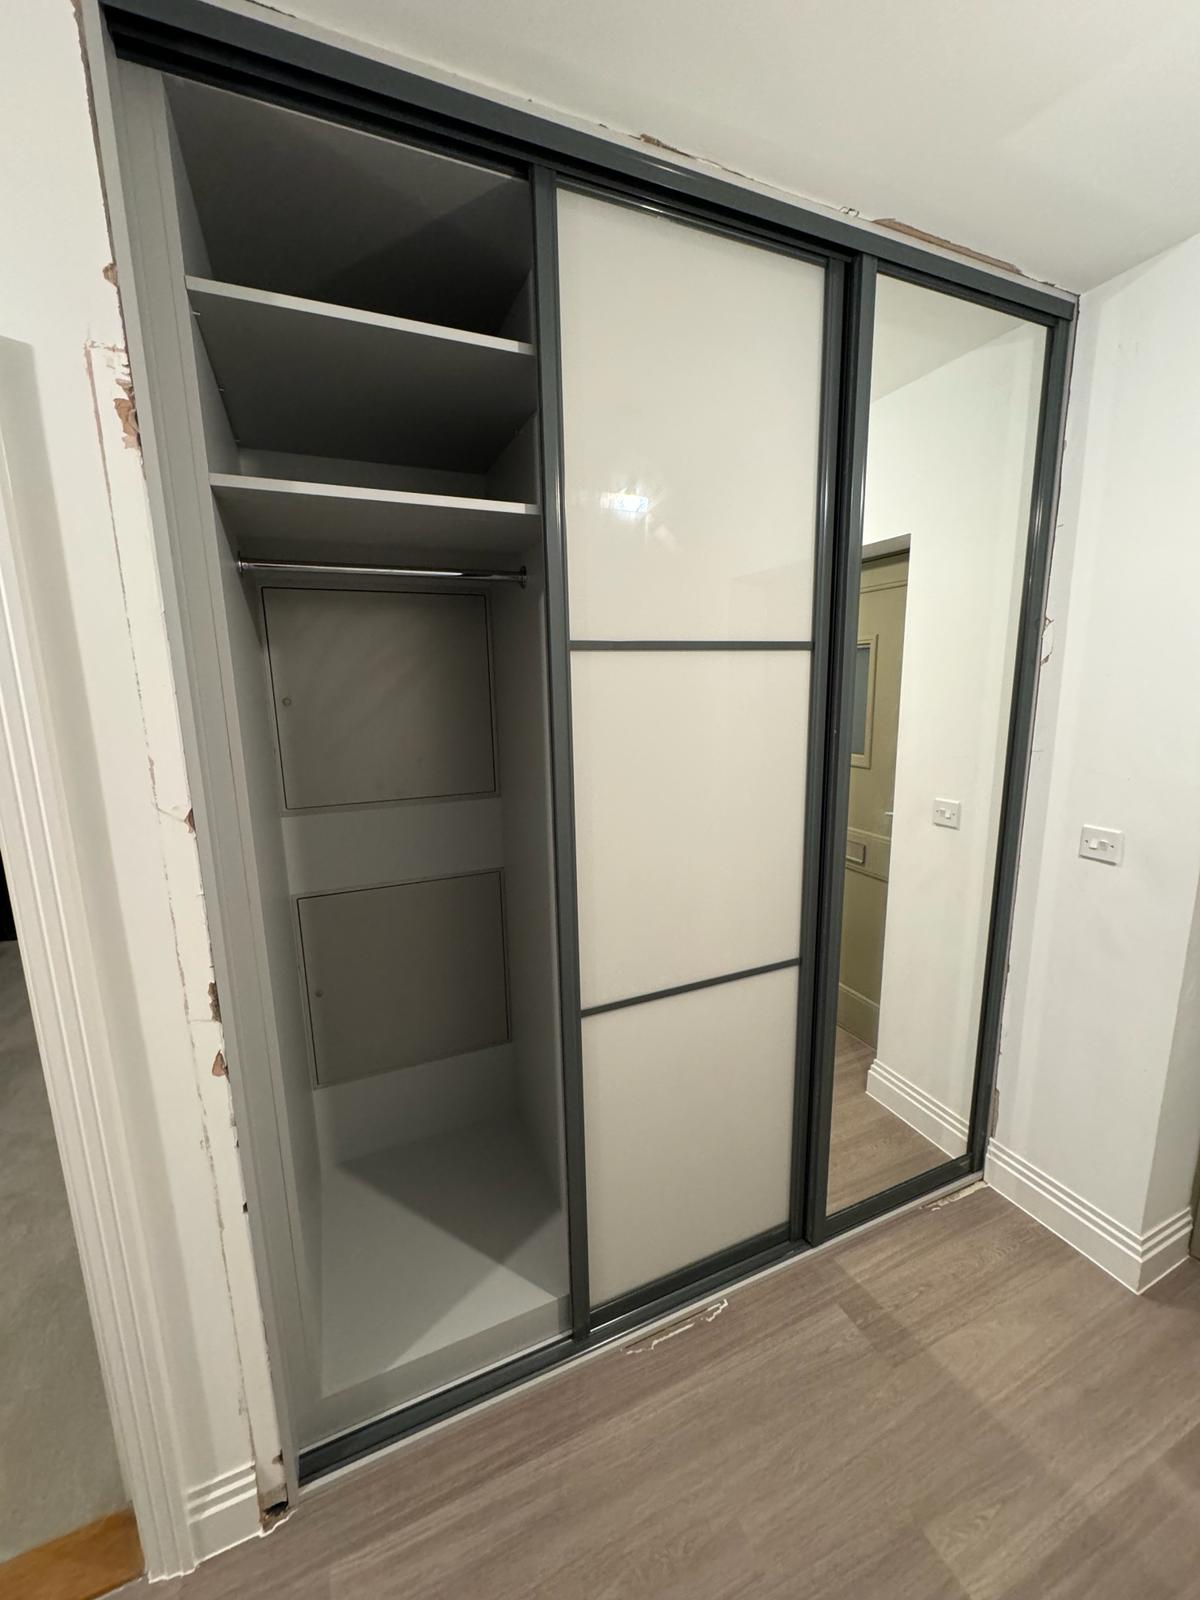 An empty built-in wardrobe with a large mirrored sliding door, partially open to reveal interior shelves and compartments, set in a room with laminate flooring and white walls. This is an essential component of our bespoke furniture collection for fitted bedrooms.